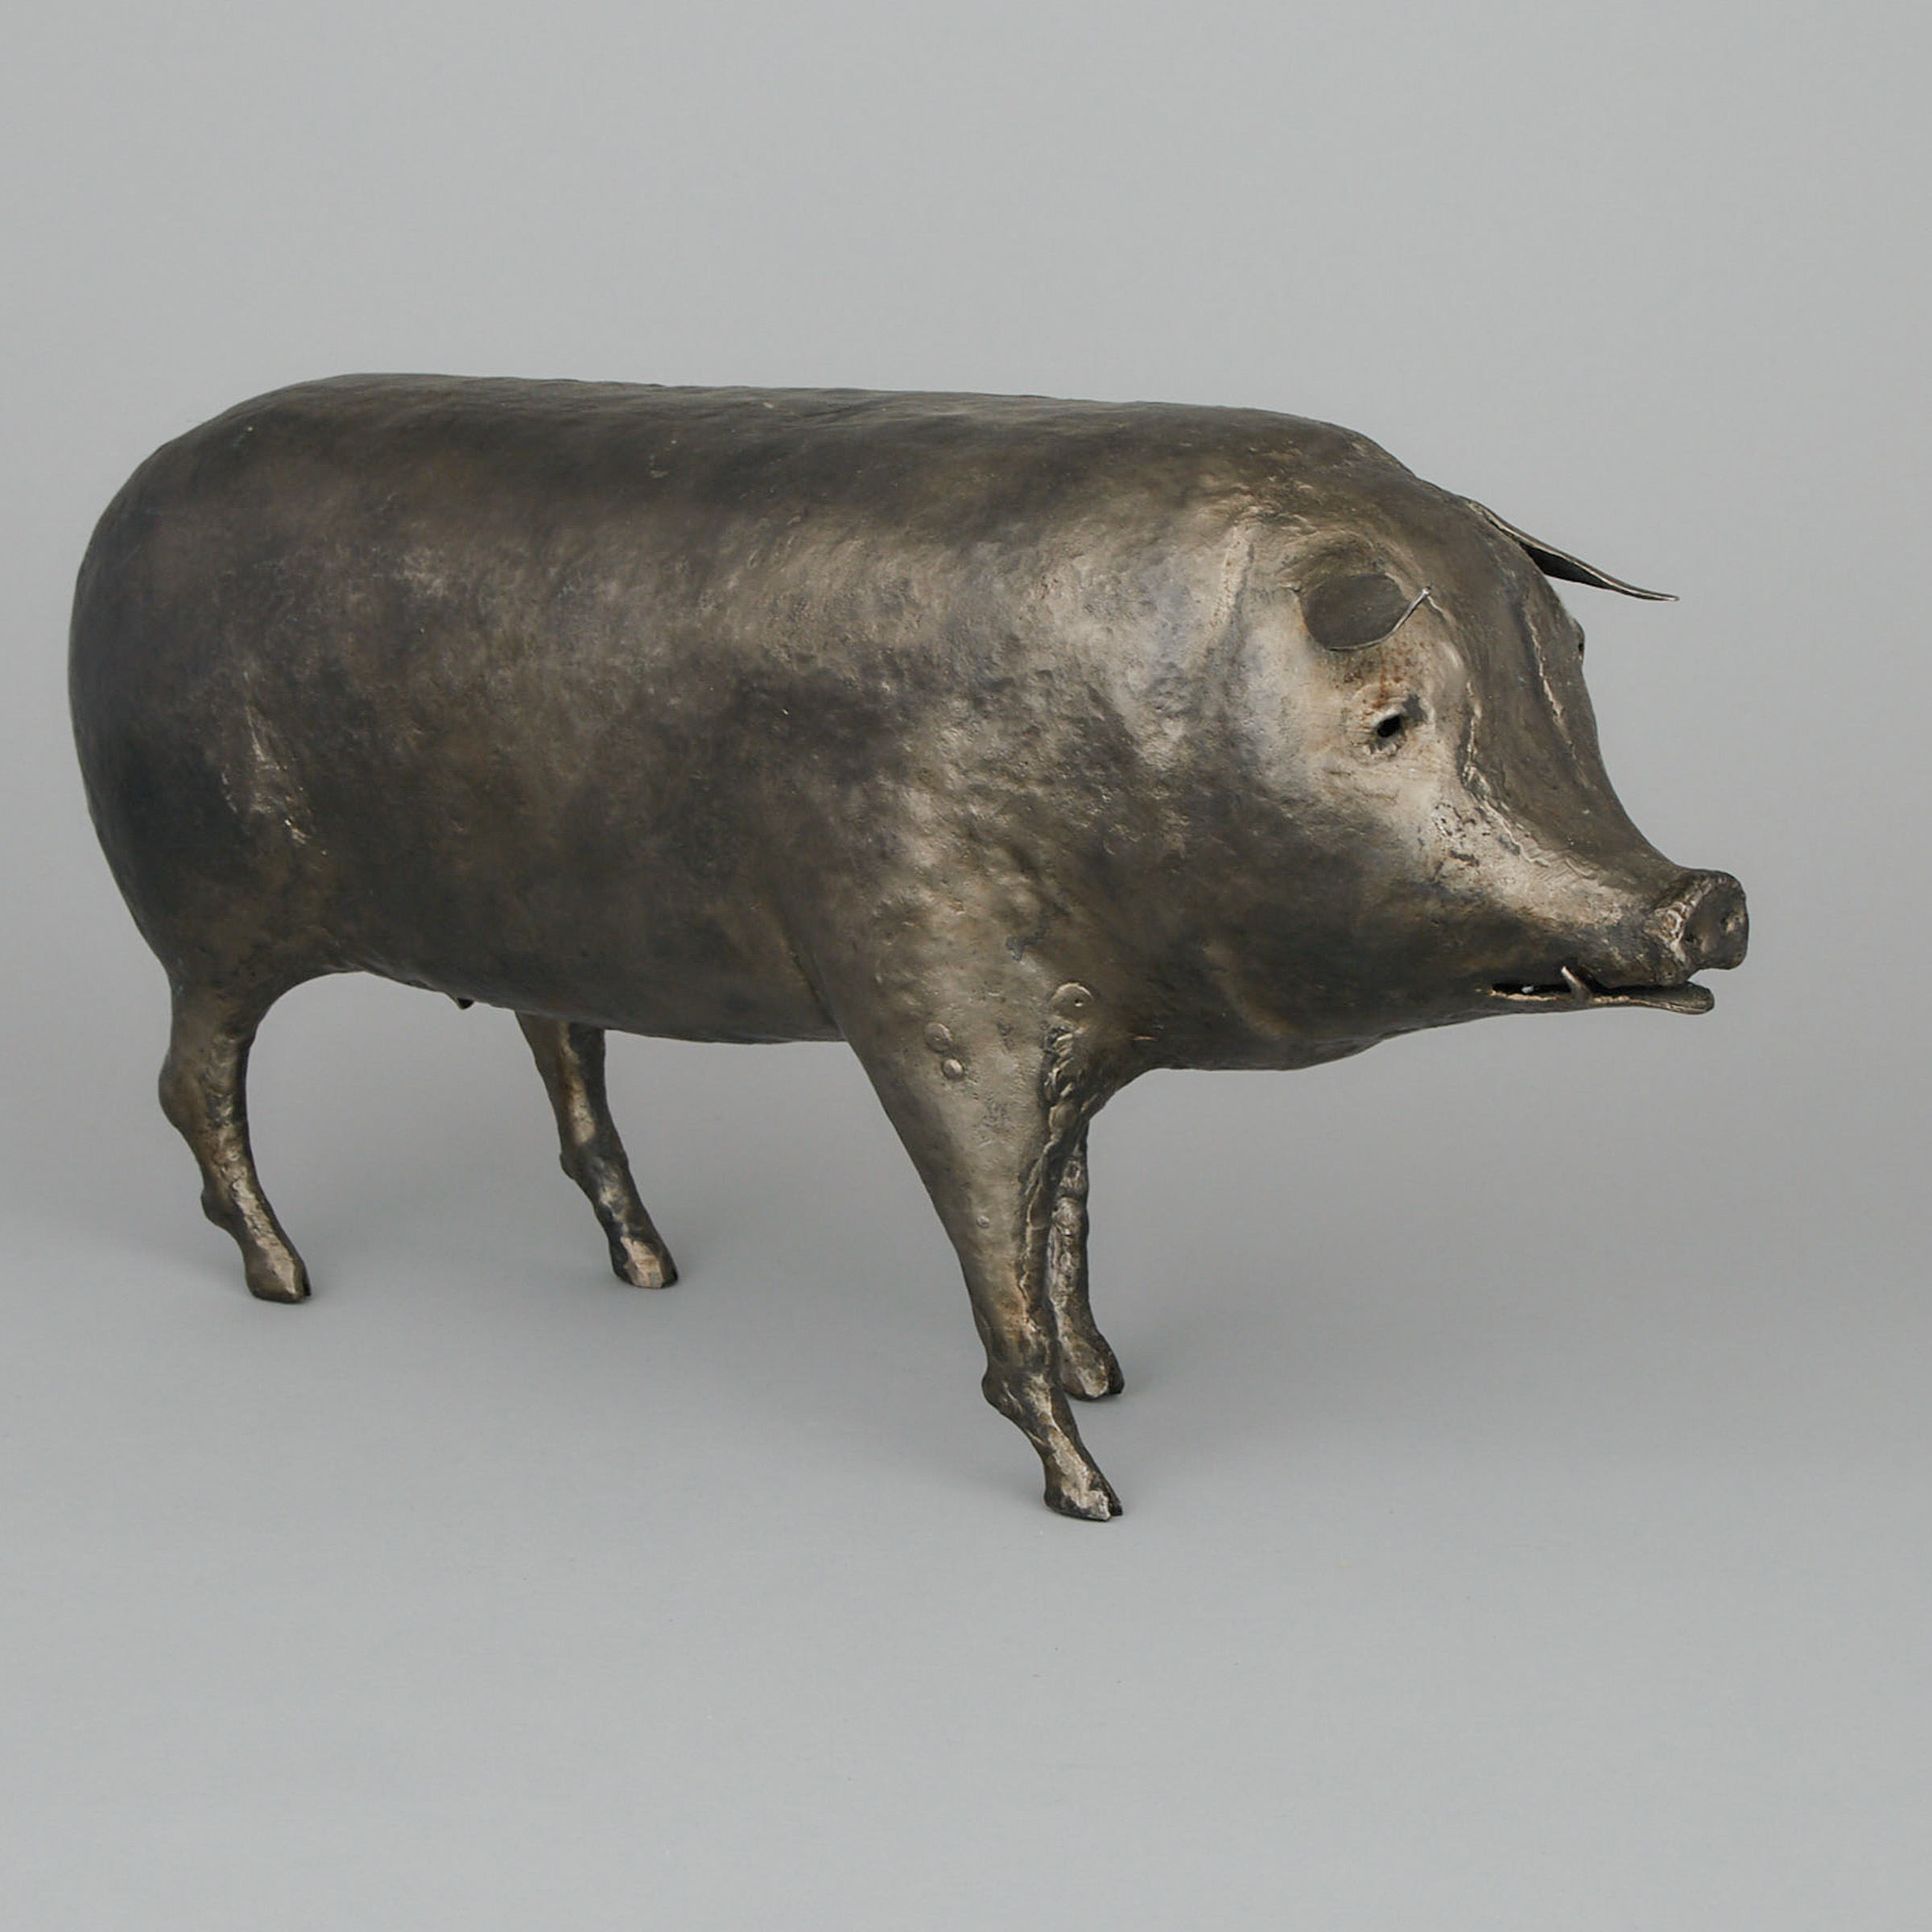 Hammered Sheet Metal Model of a Boar, Pius Beck, 20th century